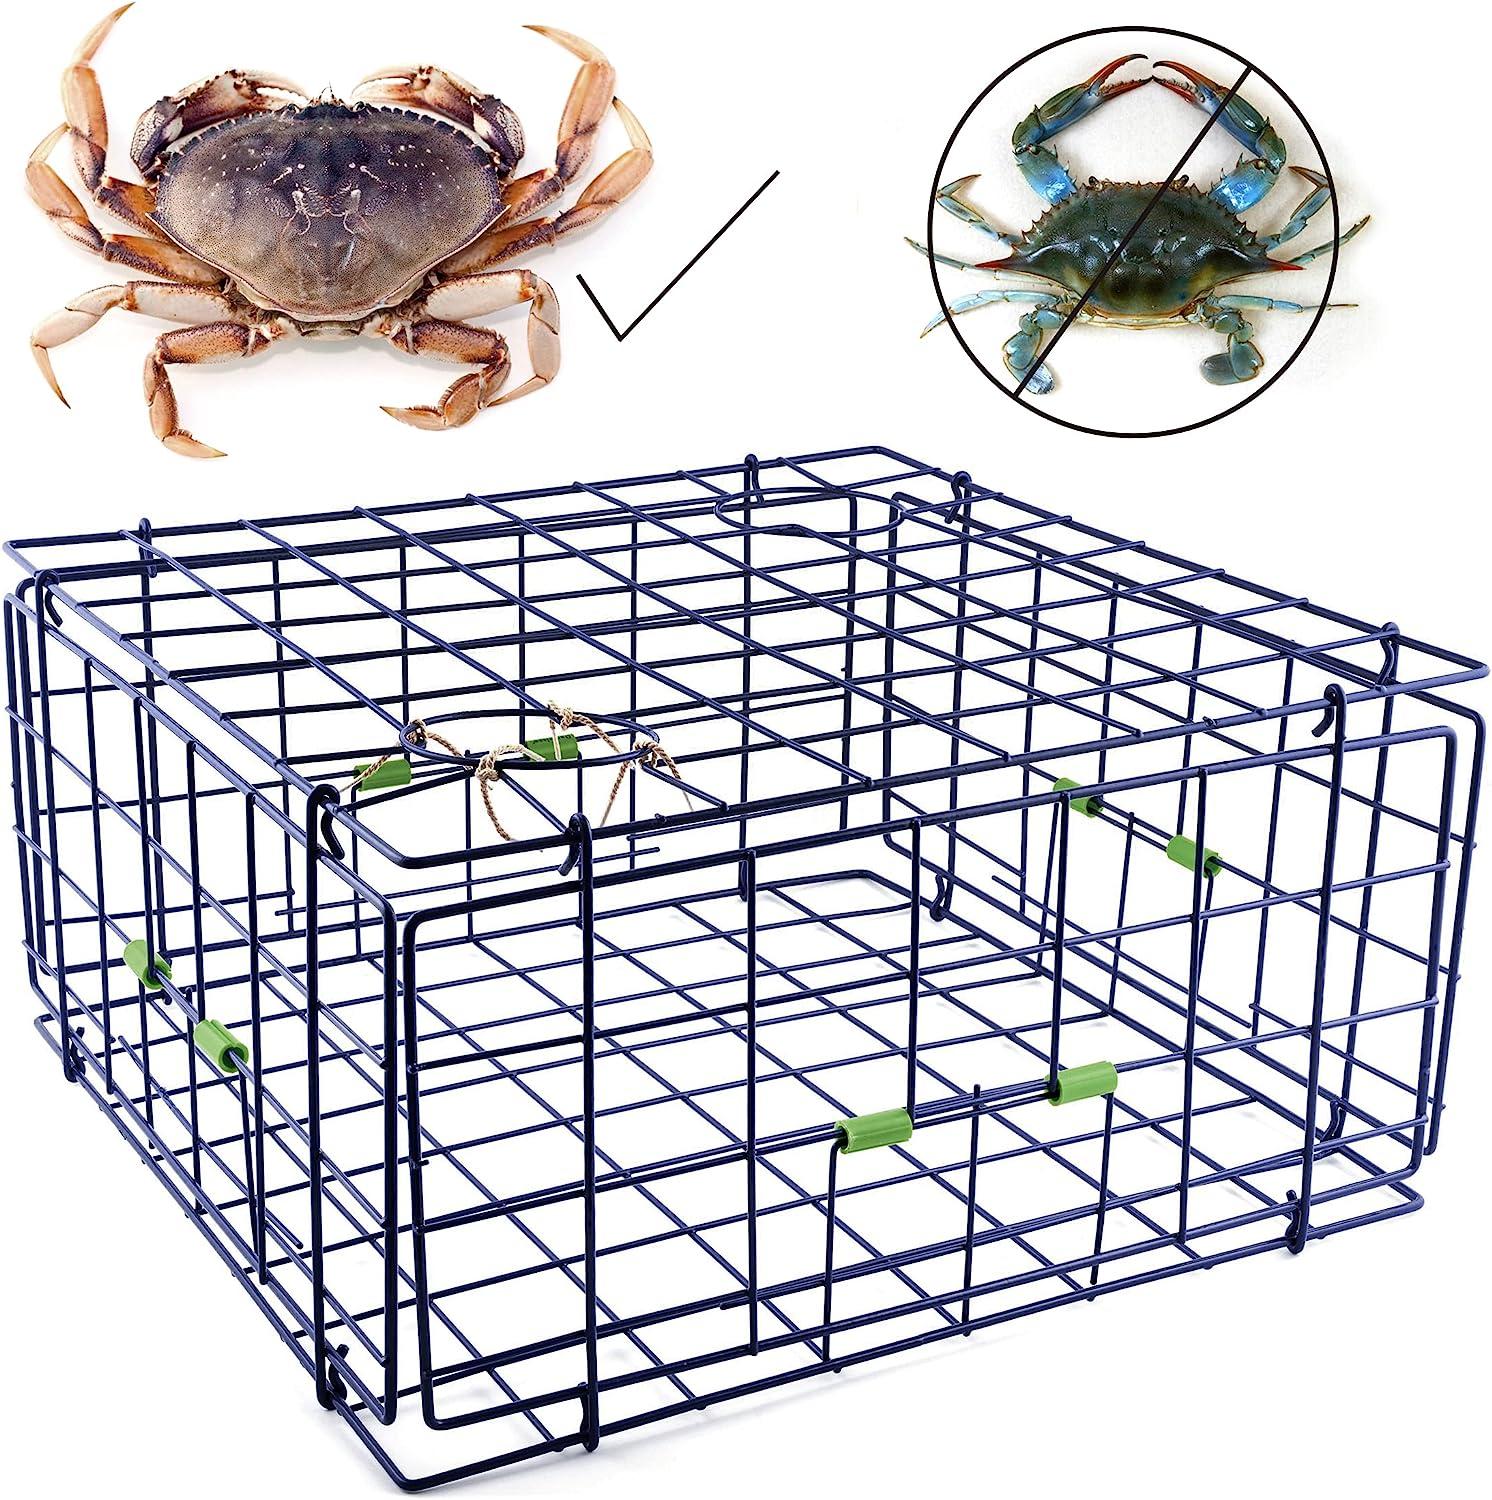 Danielson 24 Fold-Up Pacific Coast Crab Trap, Vinyl-Coated Steel Wire,  Foldable, Easy Storage & Transport, 4 Entrance Doors & 2 Escape Rings